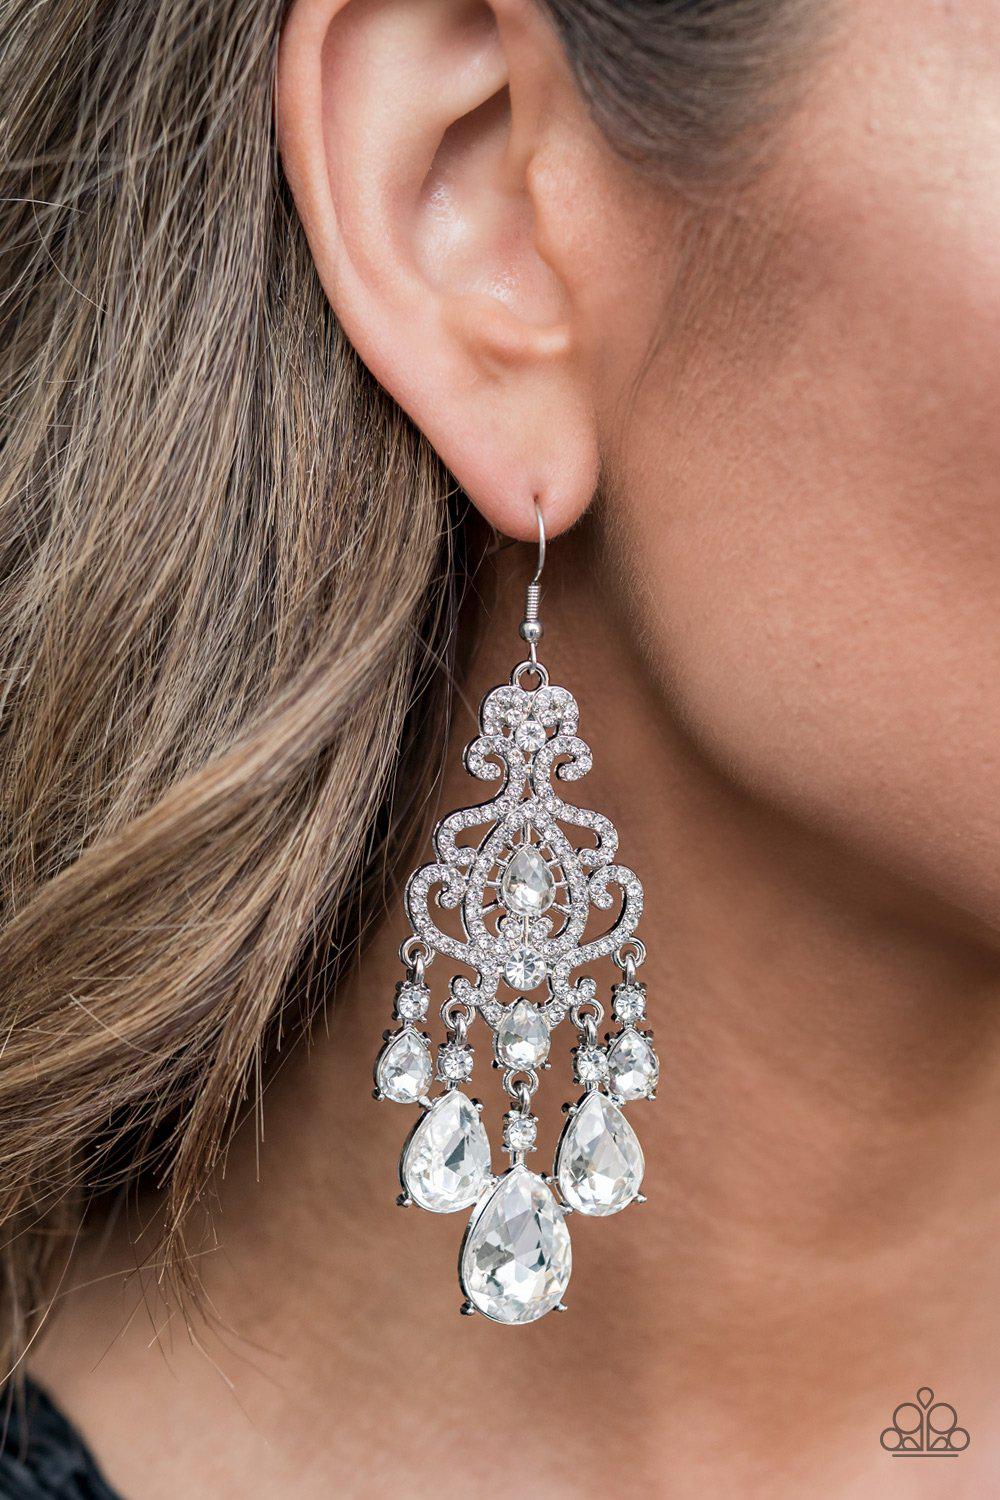 Queen Of All Things Sparkly White Rhinestone Chandelier Earrings - Paparazzi Accessories 2021 EMP Exclusive - lightbox -CarasShop.com - $5 Jewelry by Cara Jewels